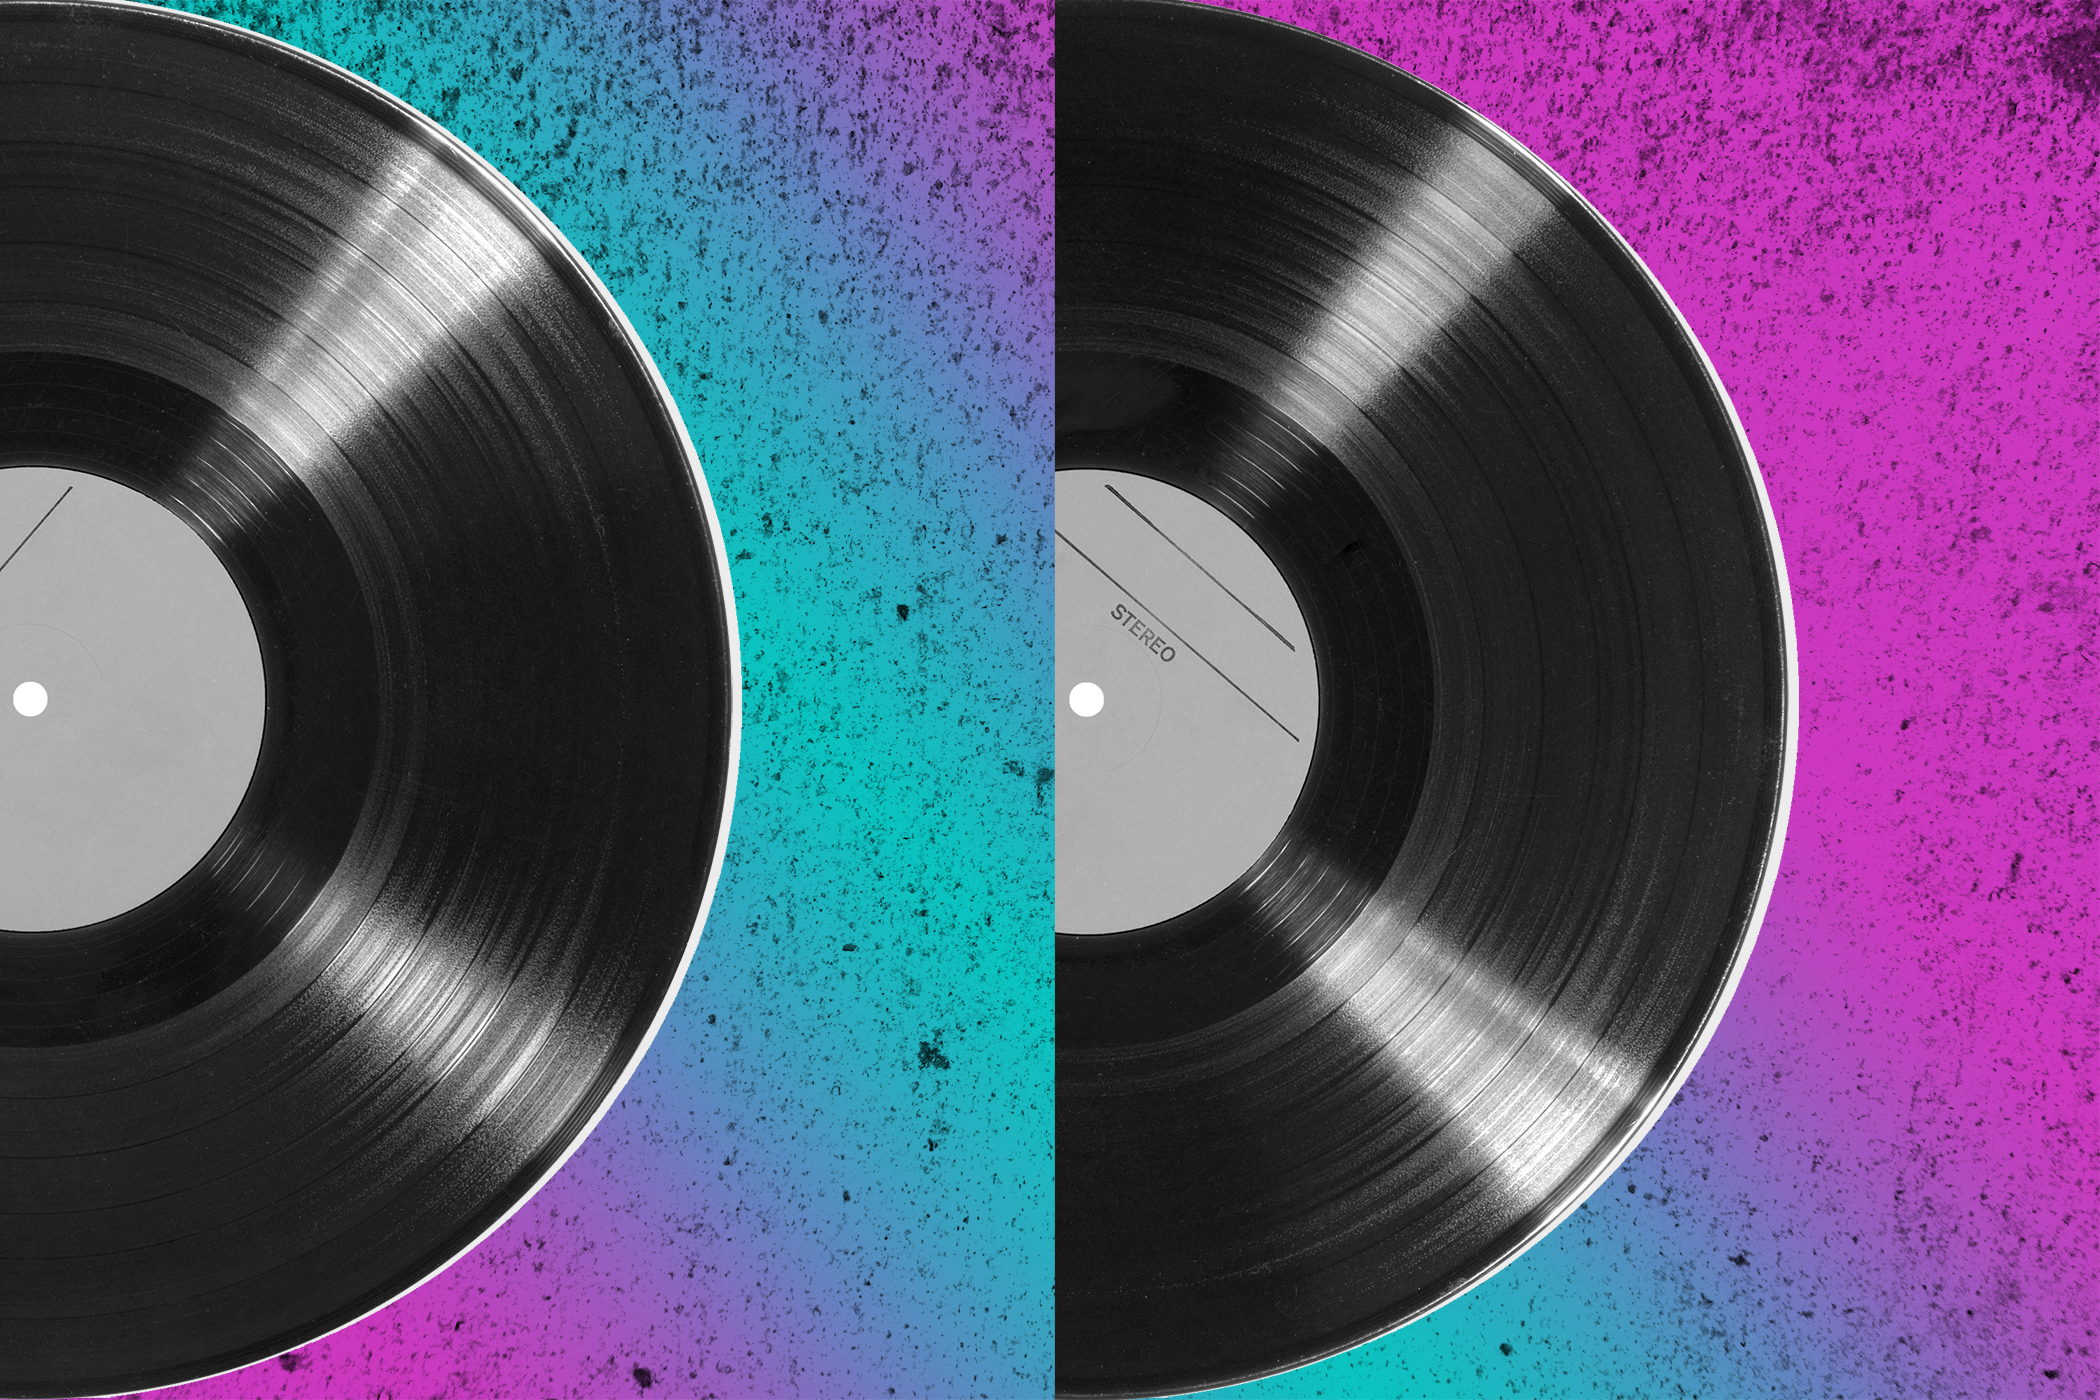 Vinyl Record Revenues Have Surpassed Free Streaming Services Like Spotify